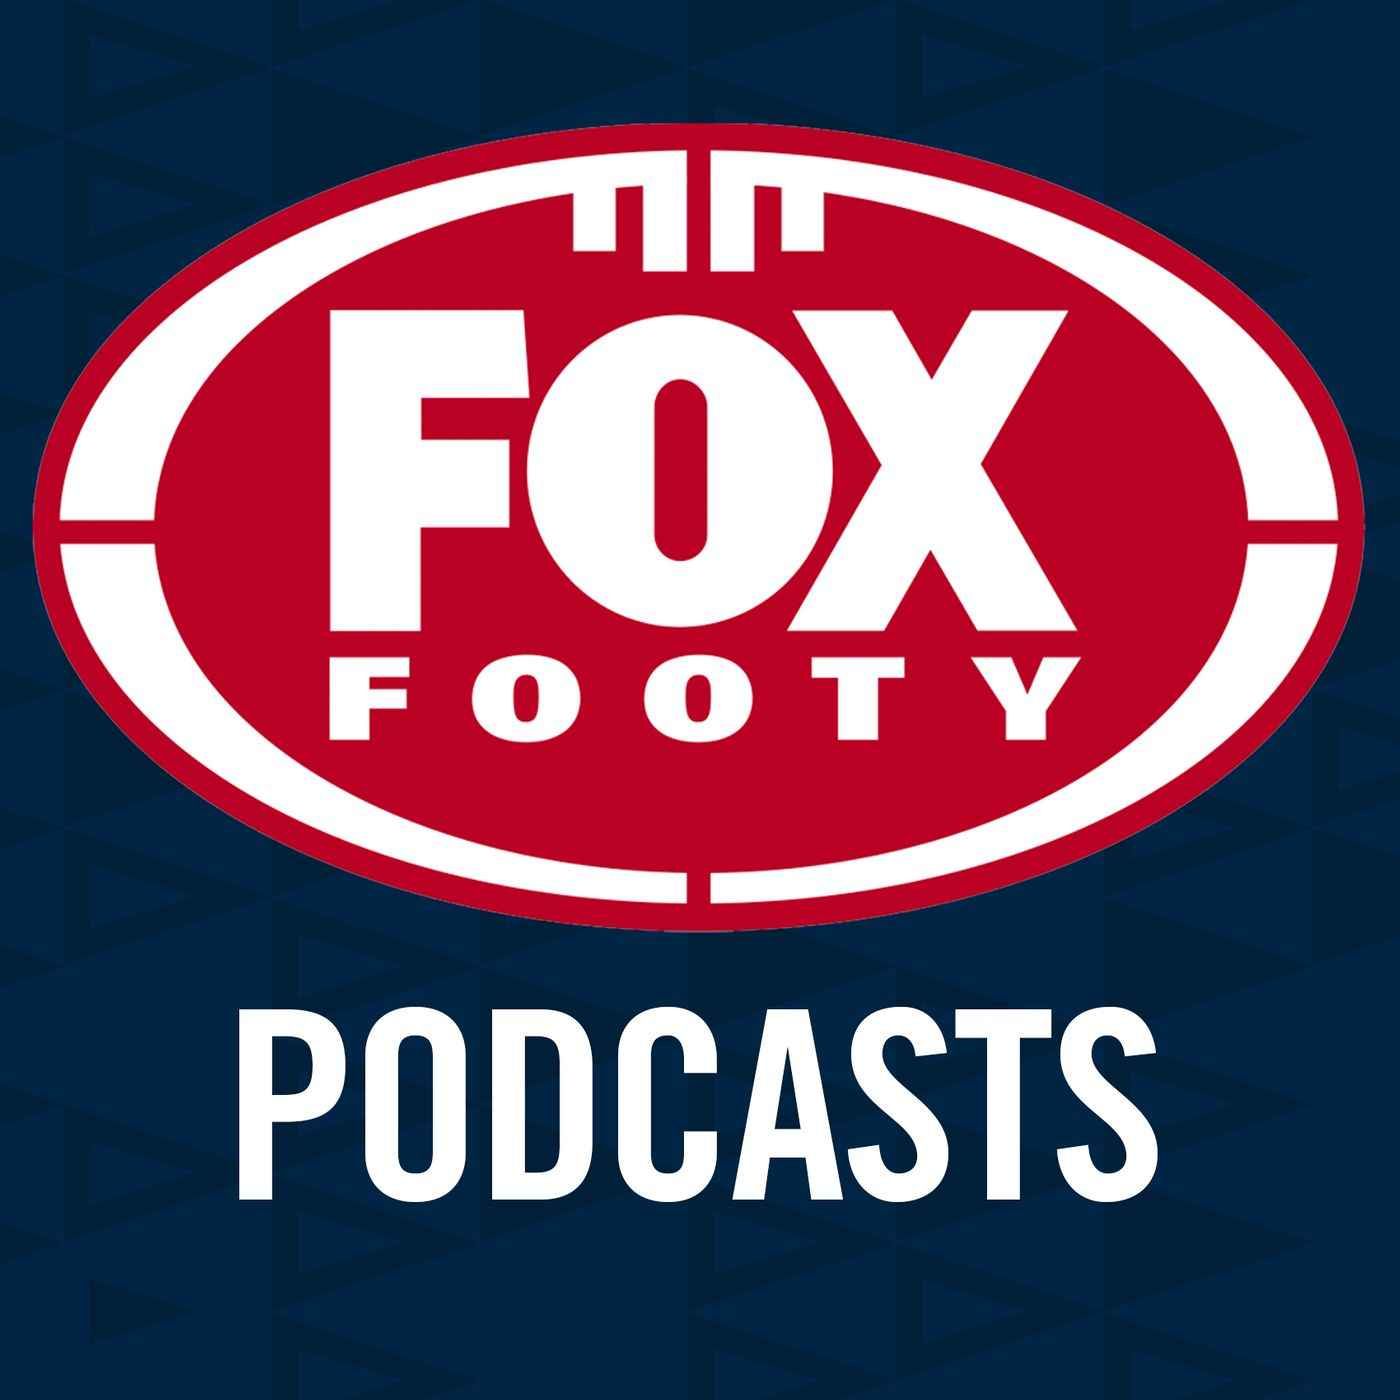 Fox Footy Podcast: New CEO, new team and new questions for fallen powers